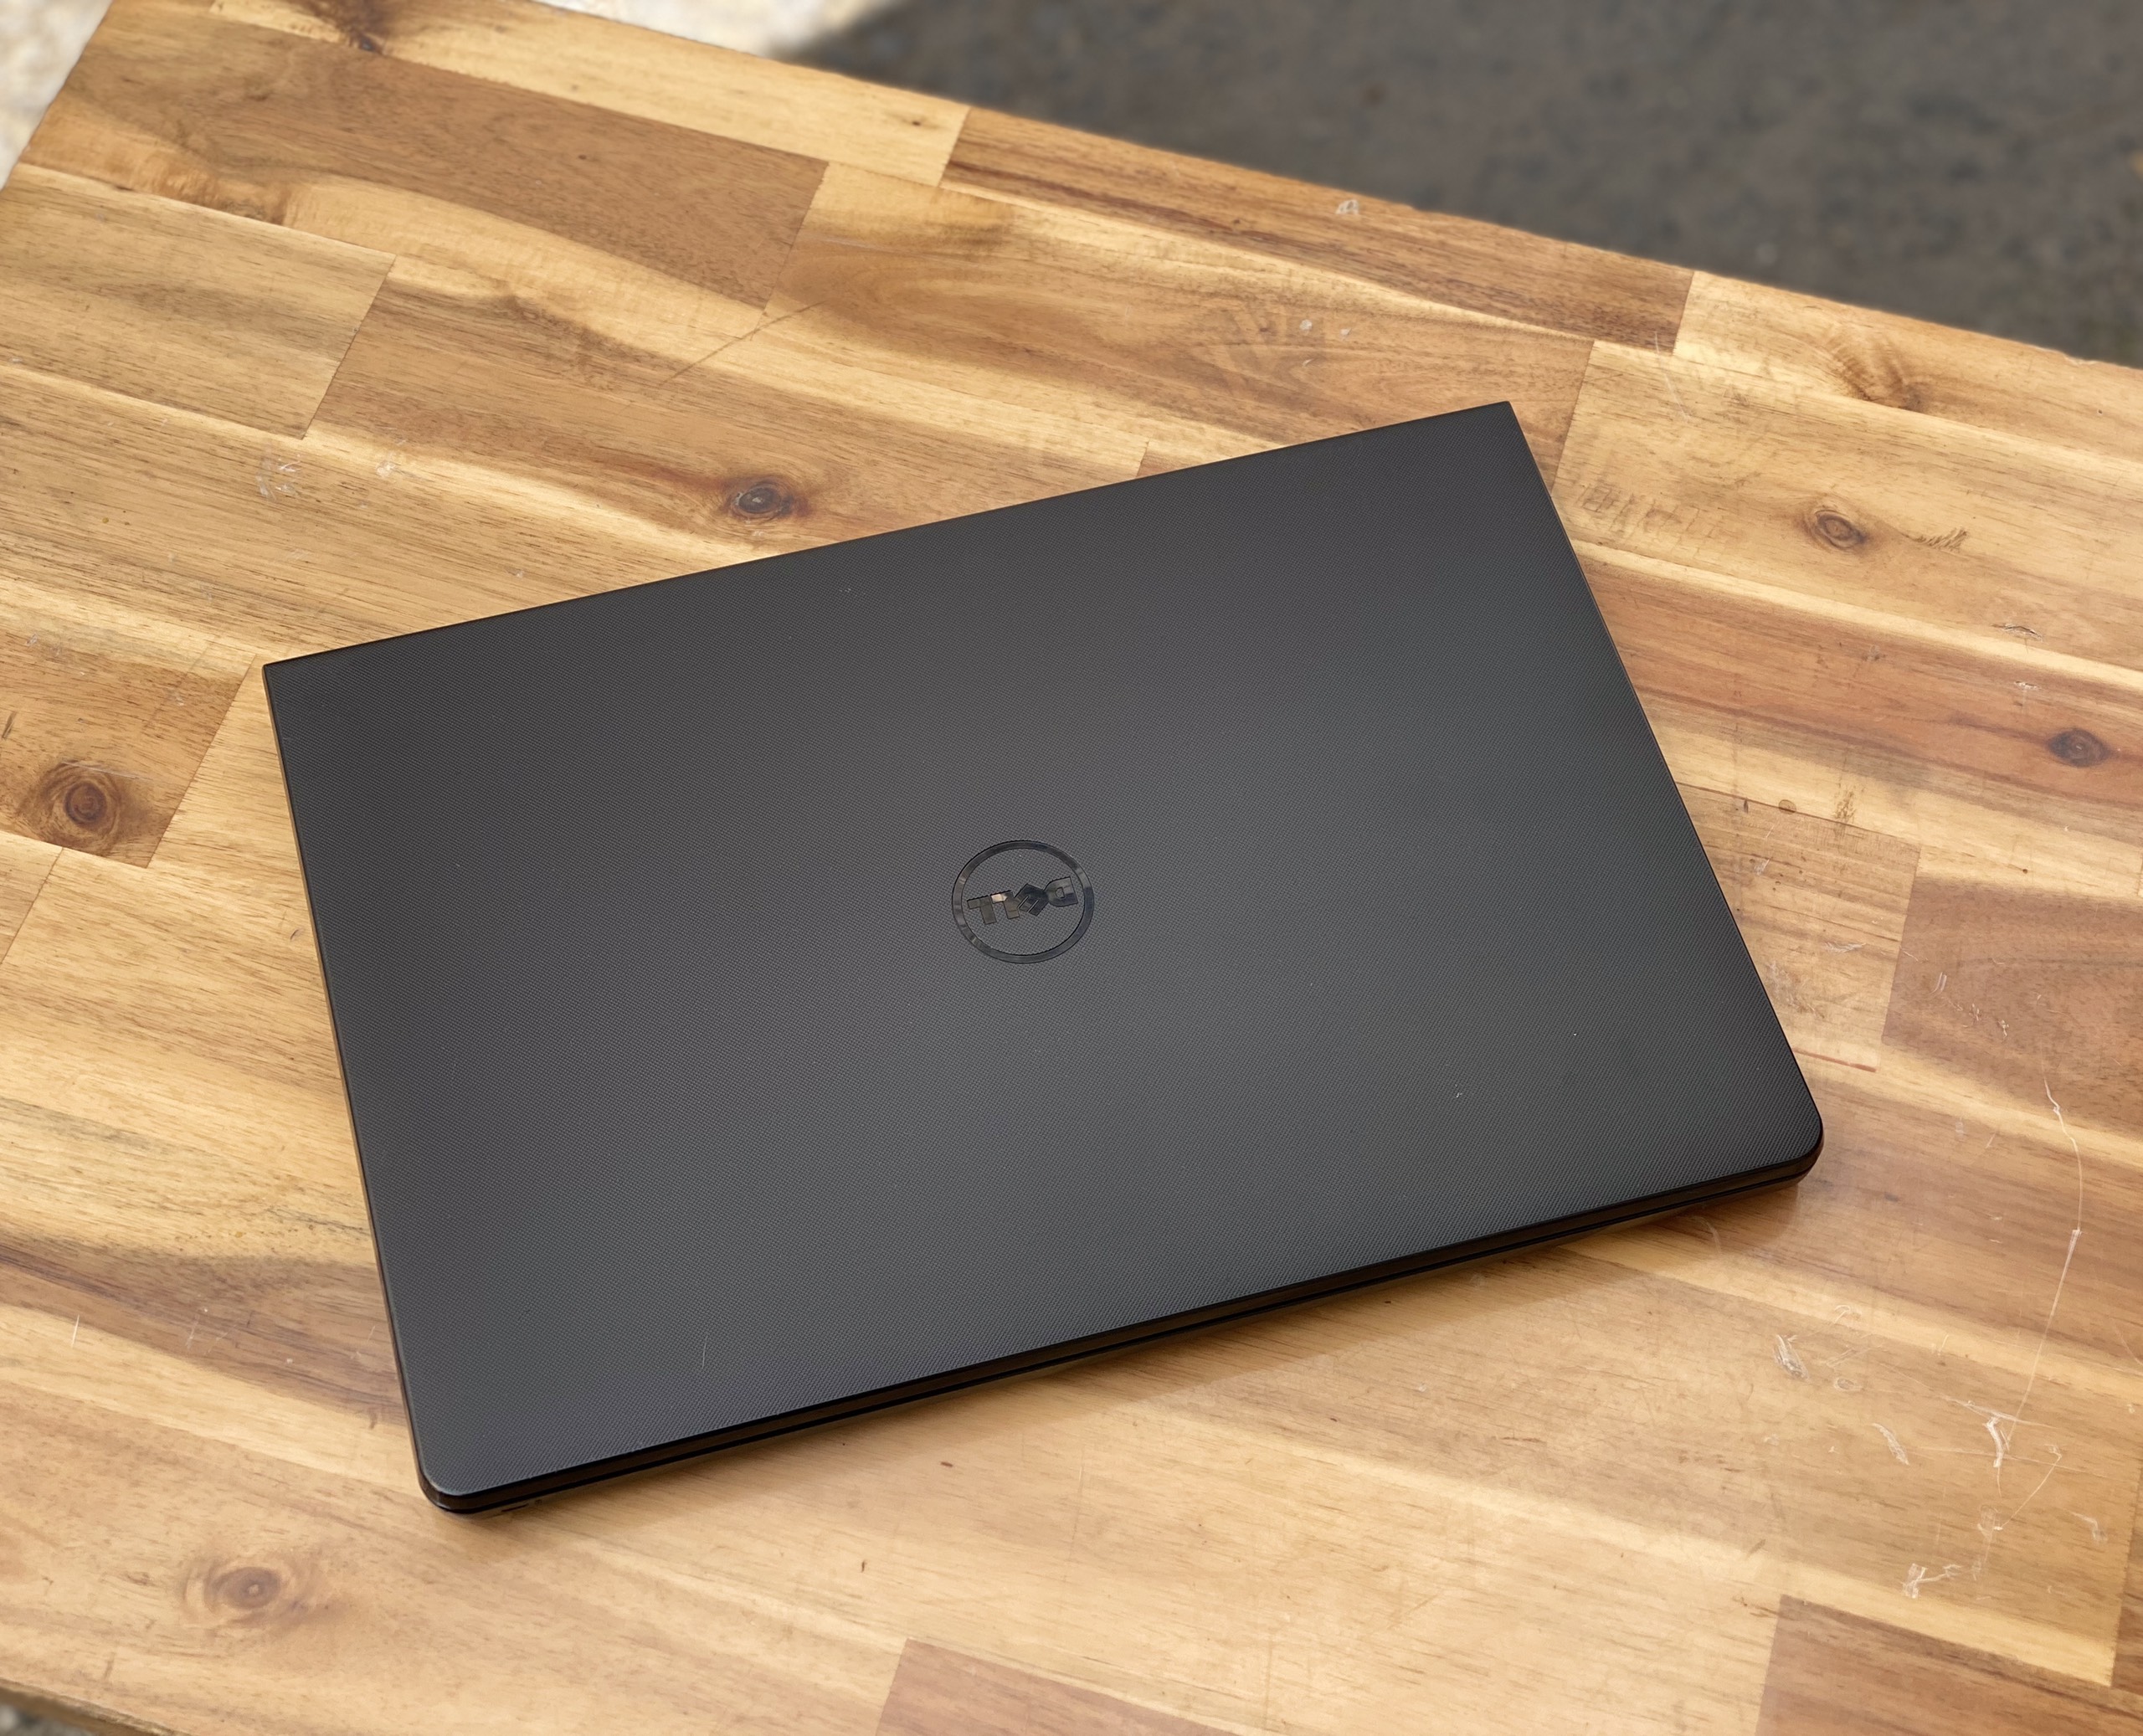 Laptop Dell Insprion 3459/ i5 6200U/ 8G/ SSD128-500G/ 14in/ Win 10/ Giá rẻ1